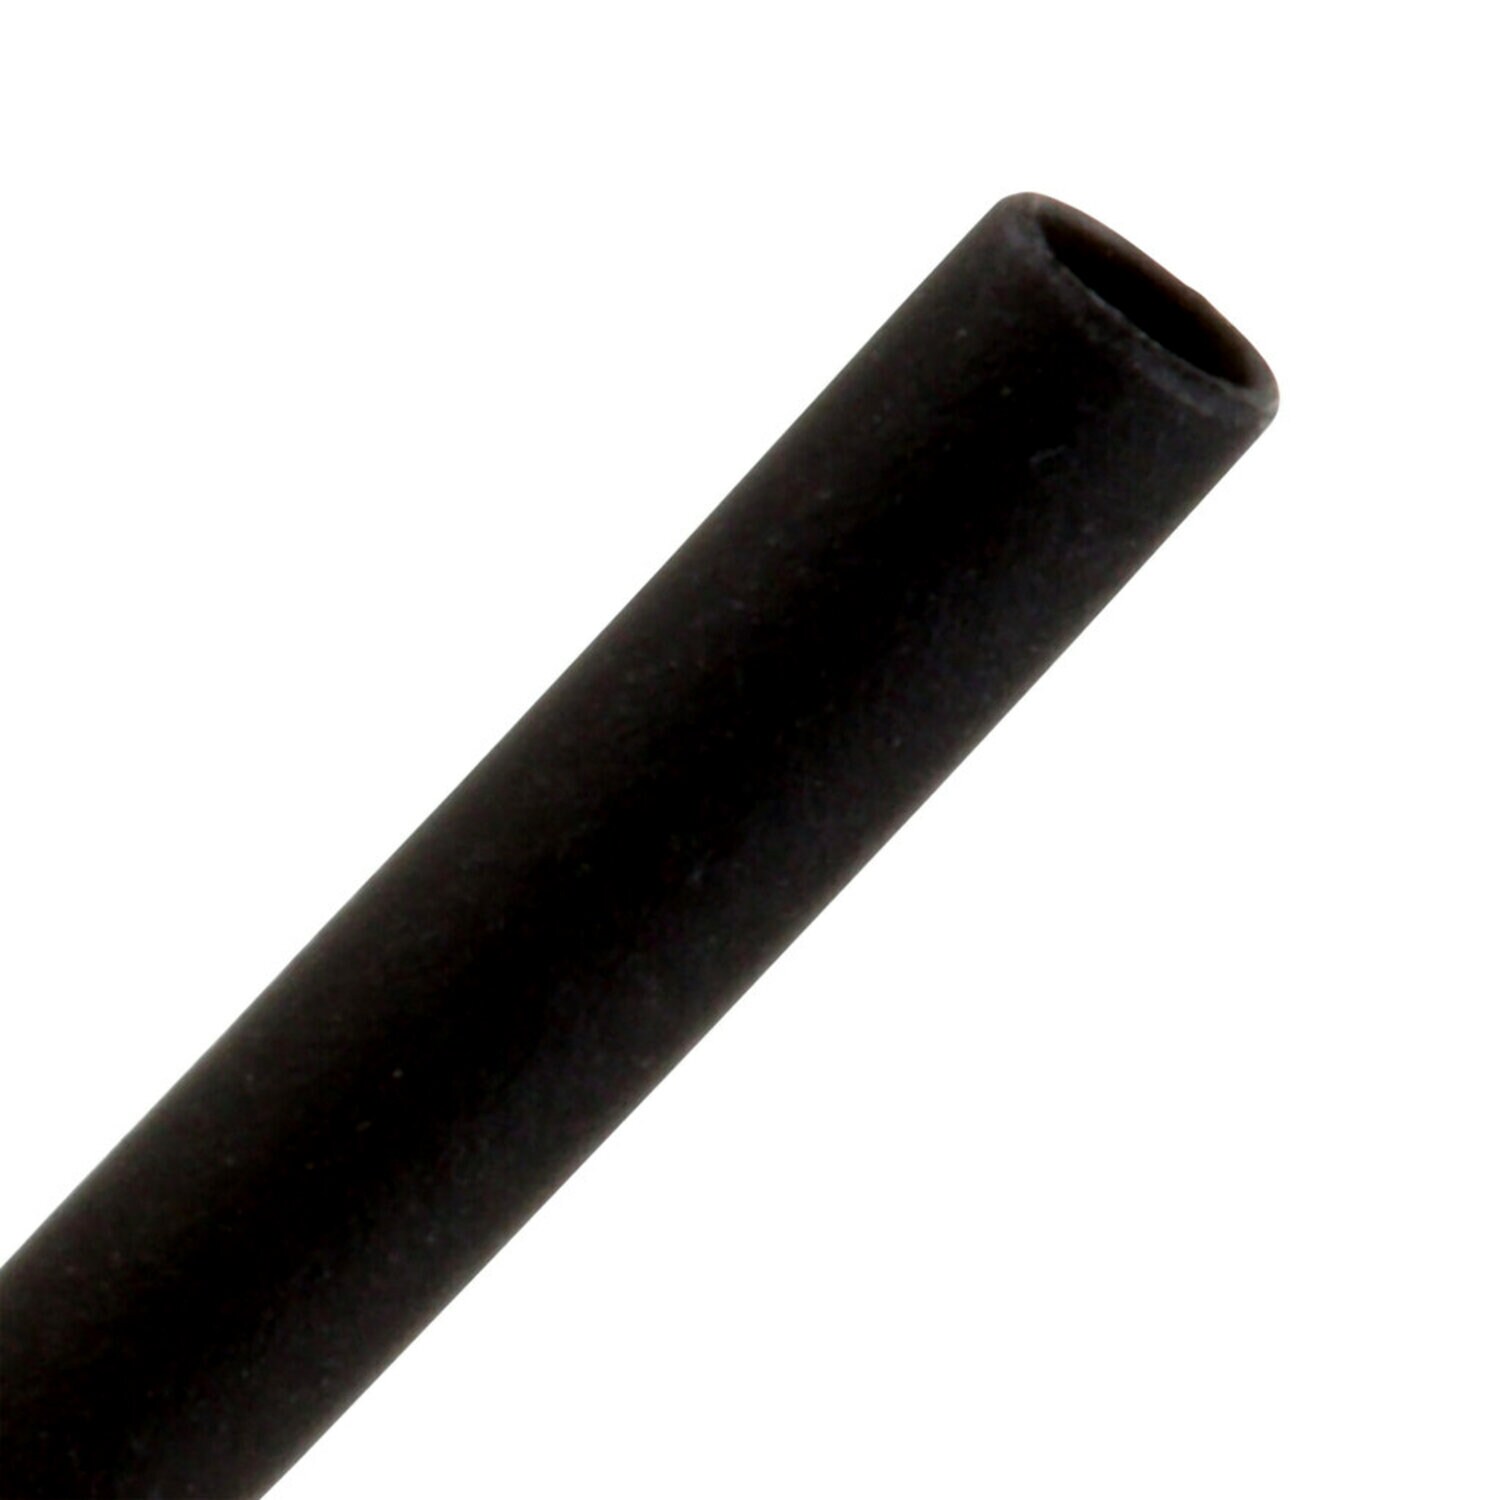 7000133629 - 3M Heat Shrink Thin-Wall Tubing FP-301-1/16-48"-Black-25 Pcs, 48 in
Length sticks, 25 pieces/case